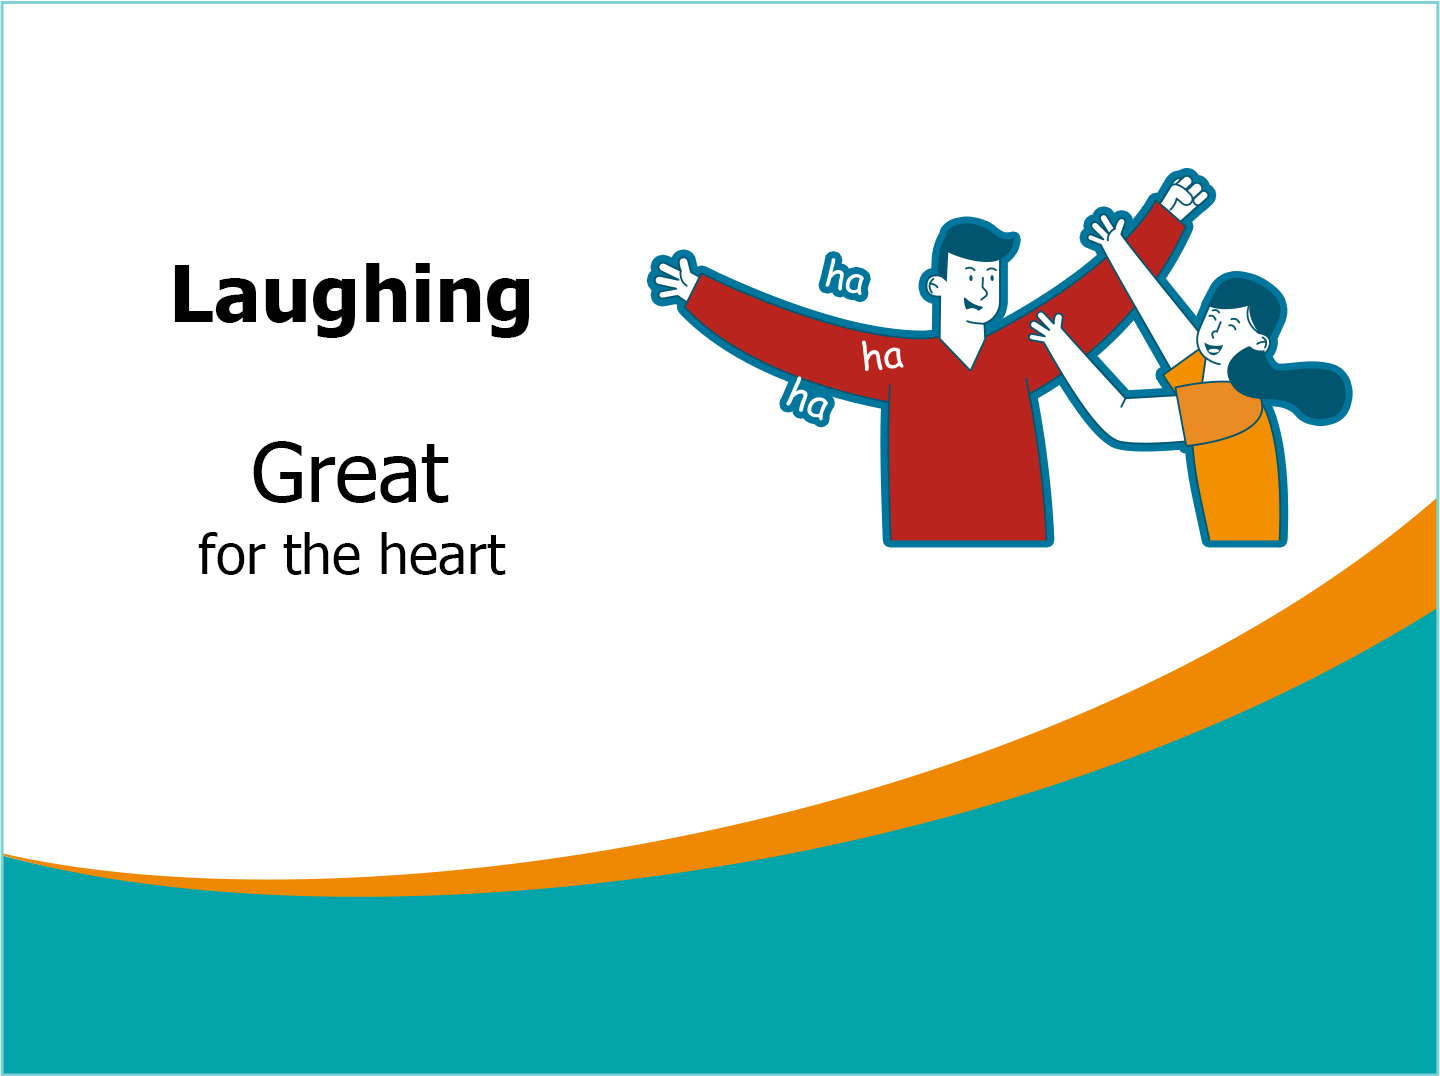 Laughter benefits the heart